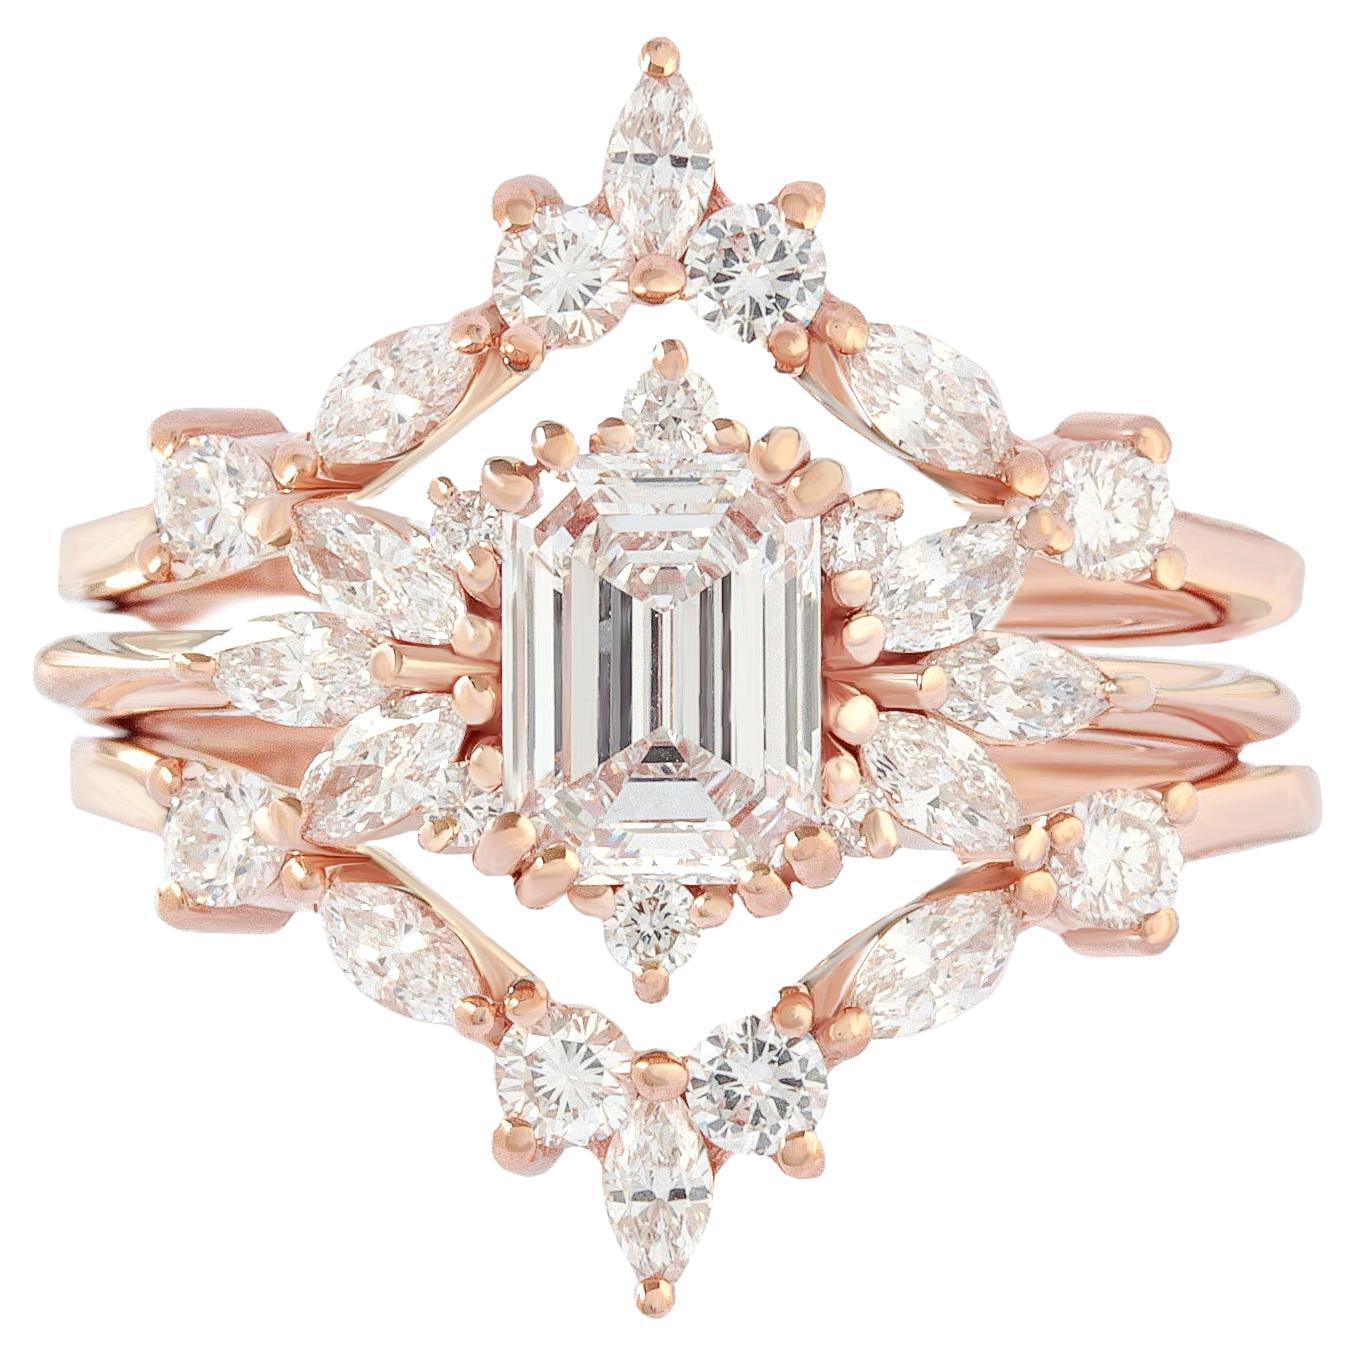 Make a bold statement with this elegant Emerald Cut Moissanite Engagement Ring Set. The 